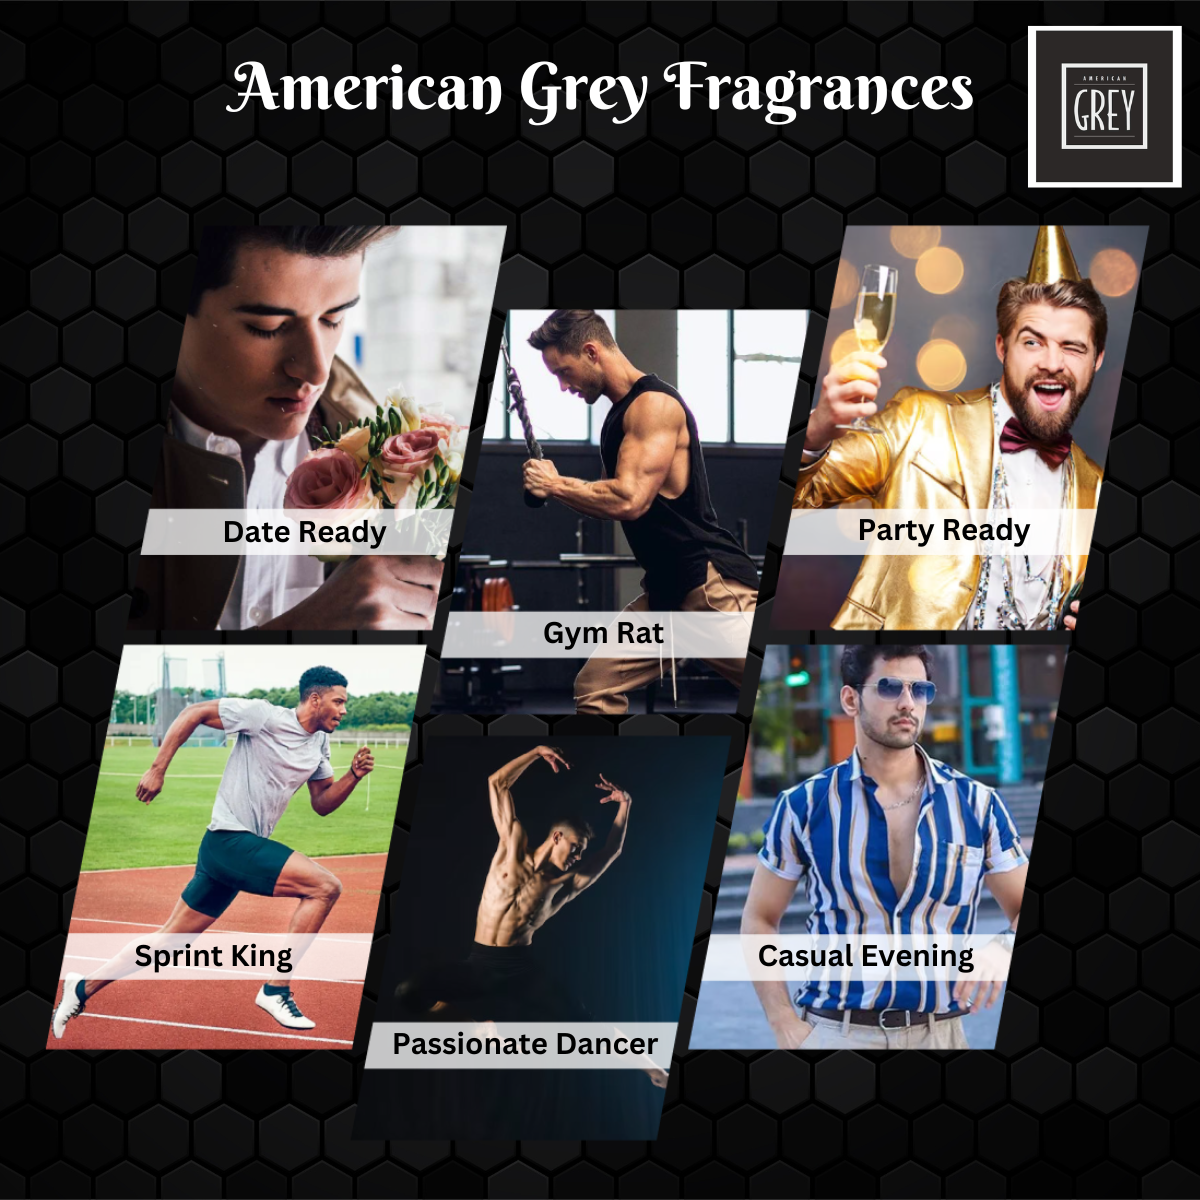 be date ready with american grey perfume spray, be party ready with american grey deo spray, grooming routine for men, best party deo, best gym deo, long lasting deo for casual evenings, can I use deodorant anytime, when can u wear a deodorant, can I wear a deo in morning, best time to apply deo, best time to apply american grey deo, american grey deo, top men deo brand in india, patchouli smelling deo,  top rated mens deo, men grooming essential, men fragrance for winter season, best deo for cold weather, popular winter deodorant for men, best deo for winter season, best deo for winter season, casual evening wear for men